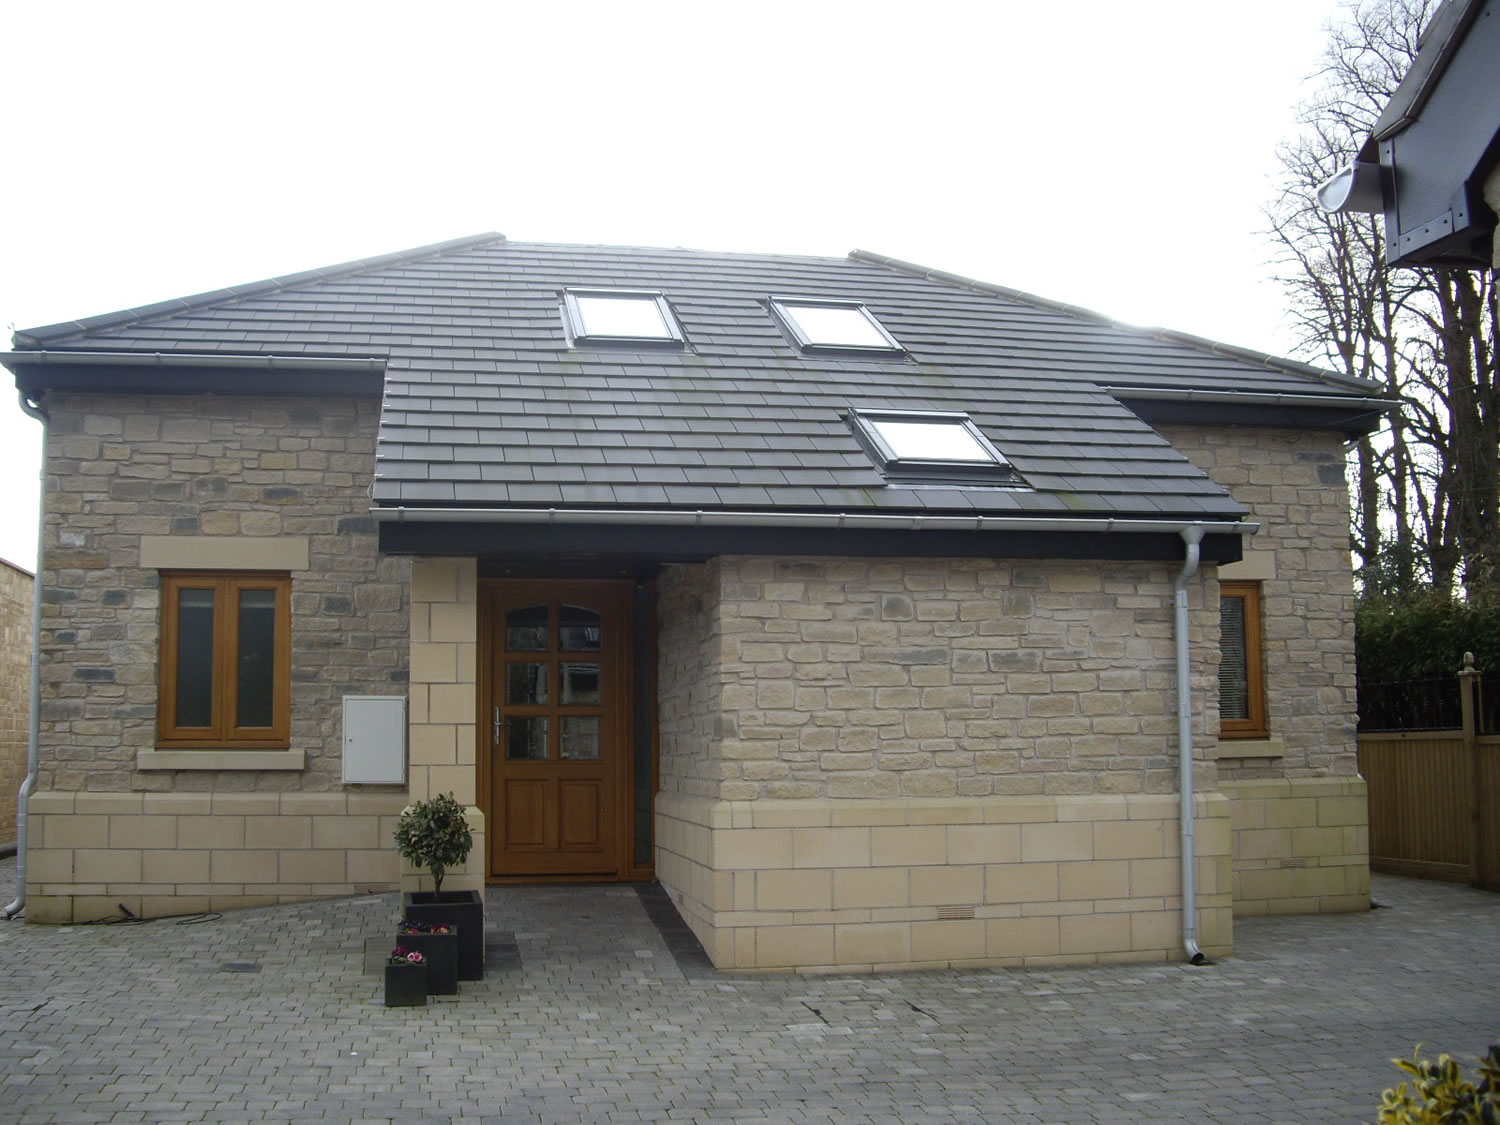 Outside view of the Wilcox 4-bedroom Eco friendly Sip house in Somerset